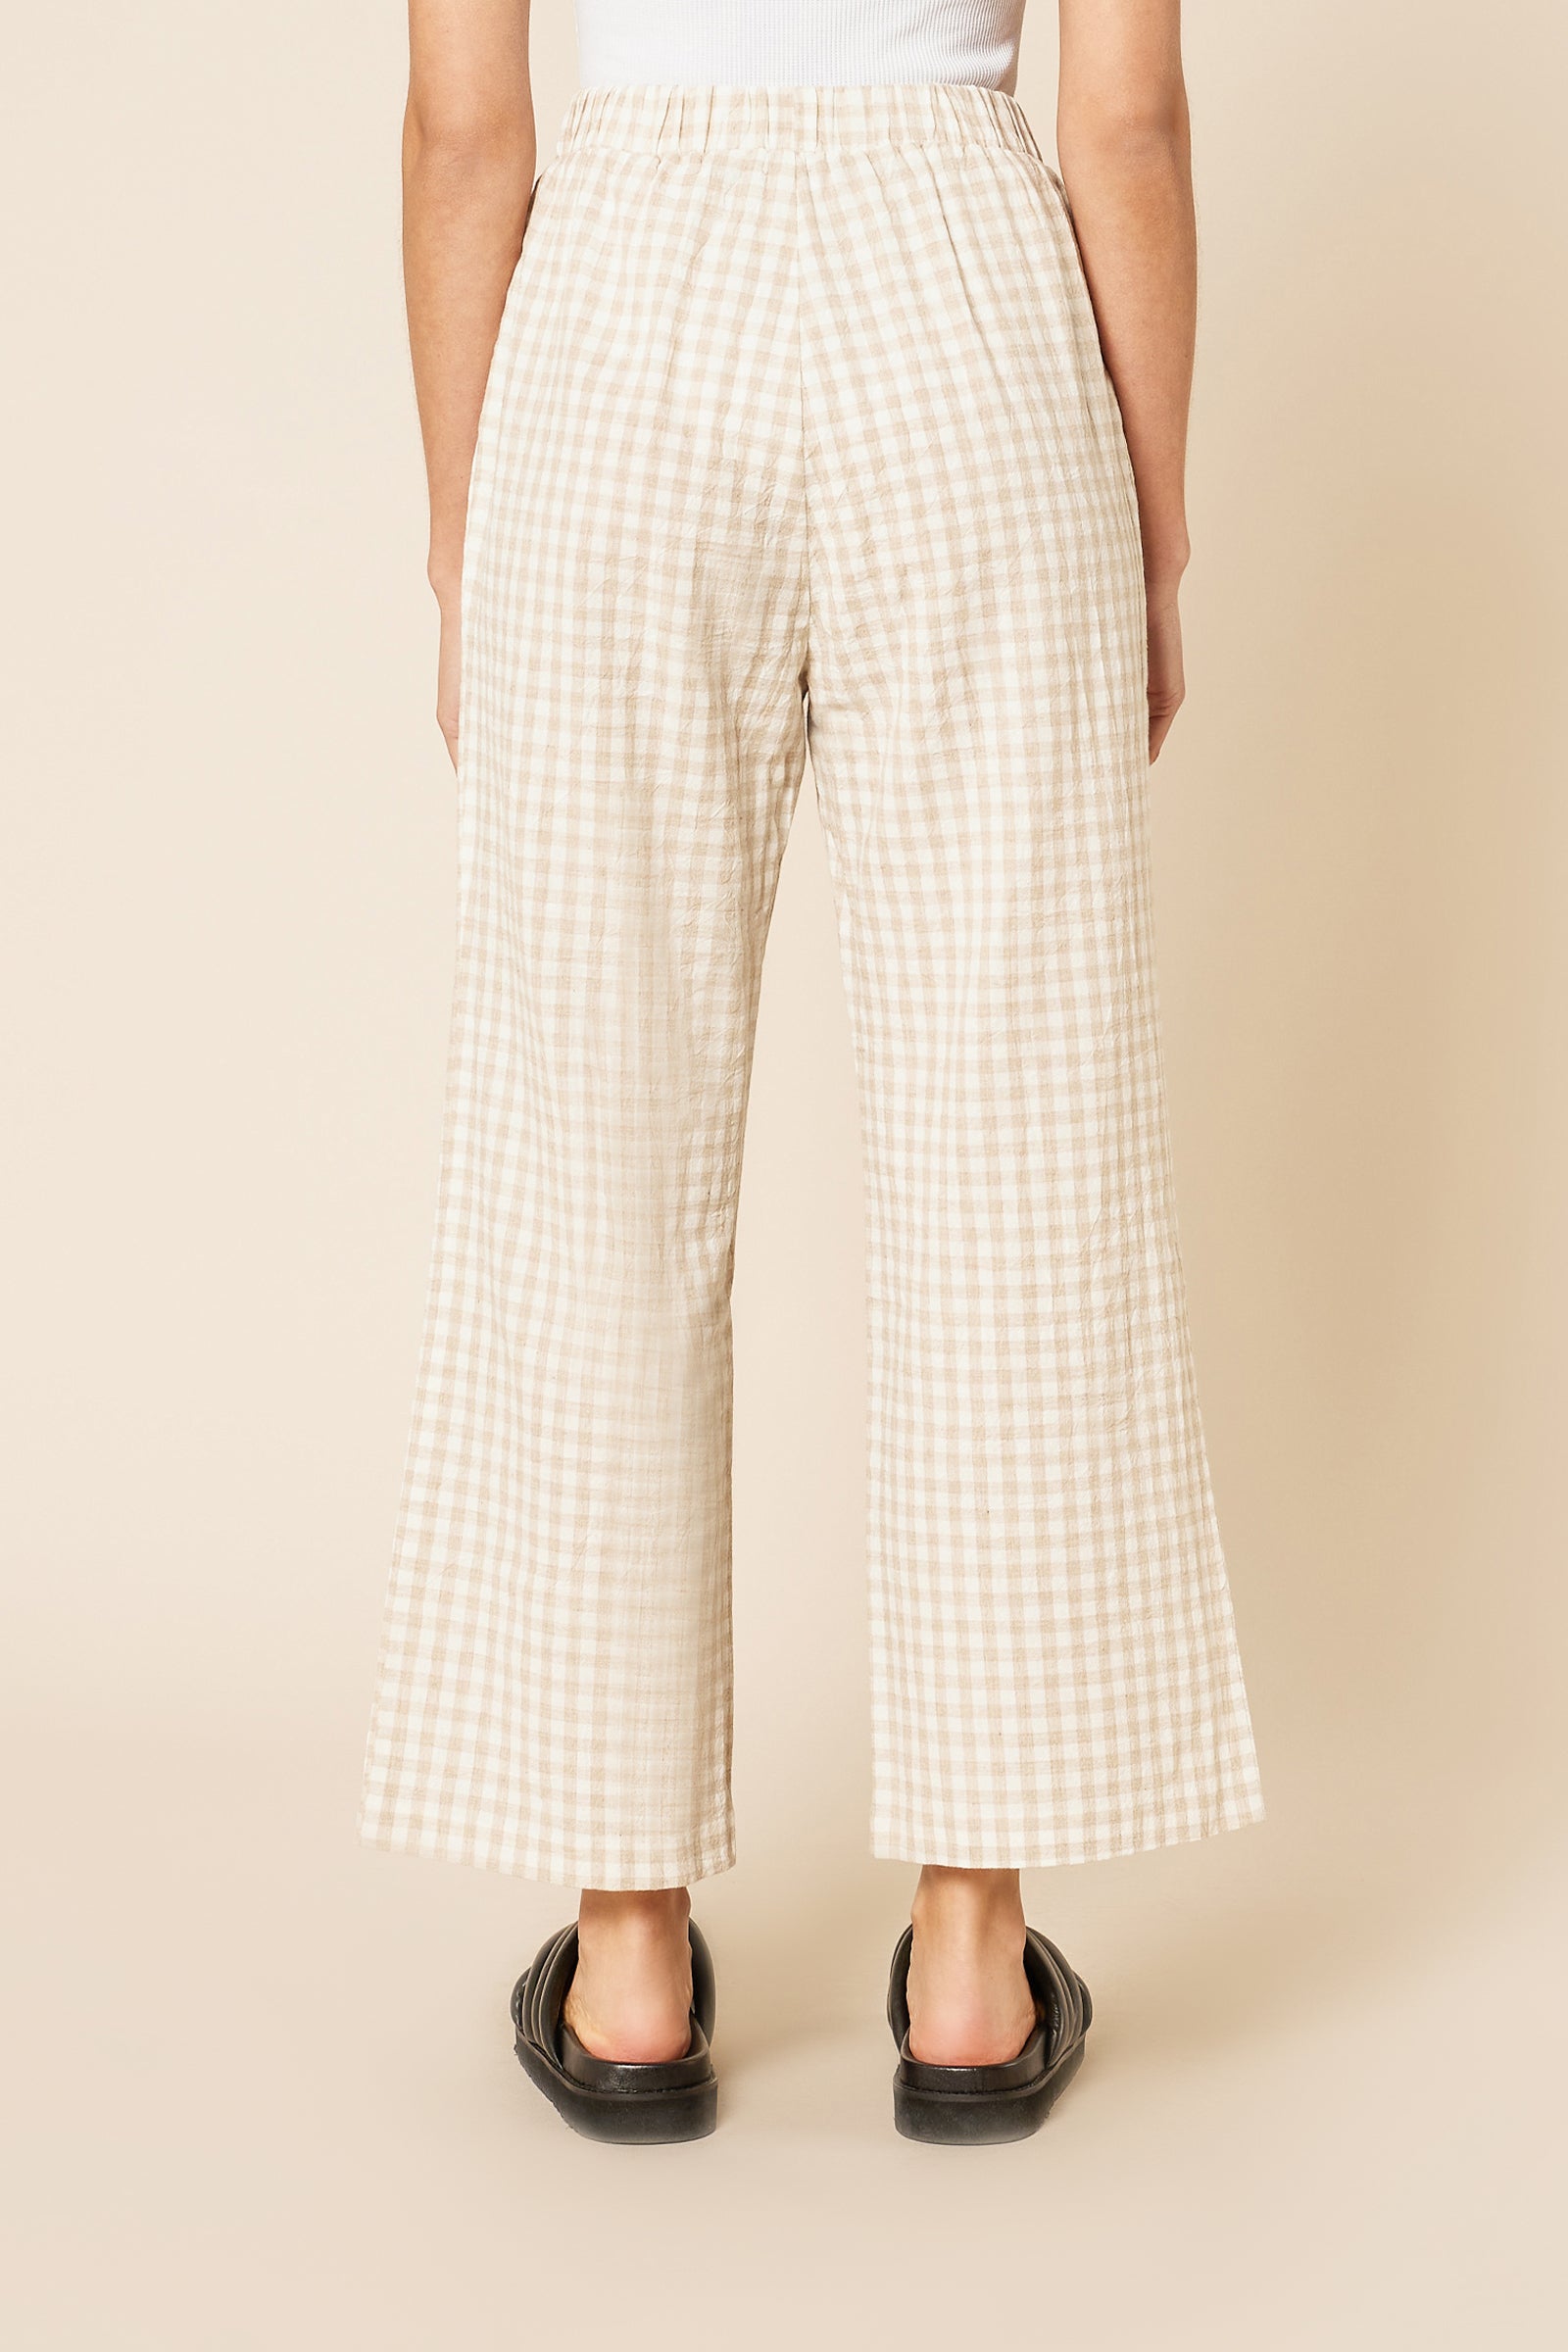 Nude Lucy Clive Check Pant In Check 